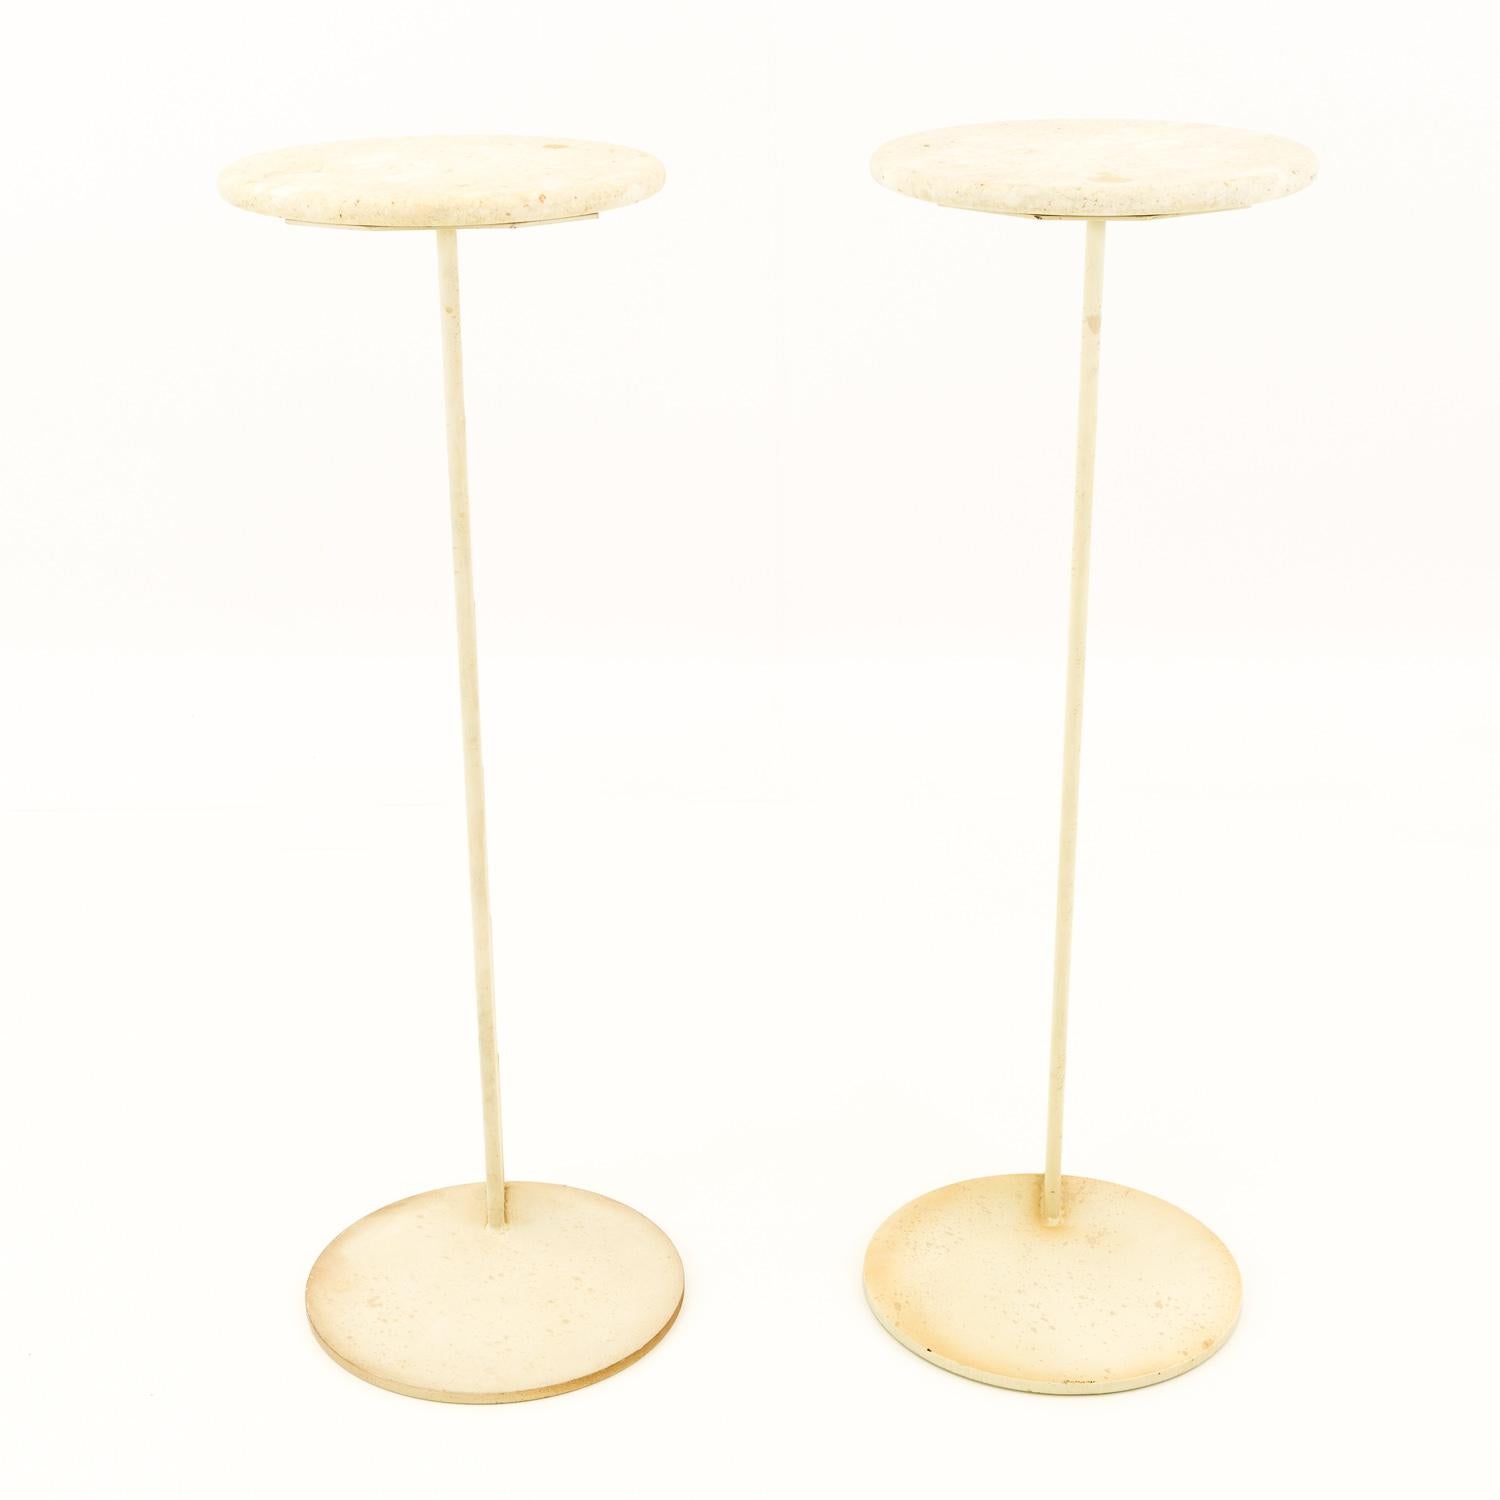 Curtis Jere Mid Century white marble pedestal stands, pair
These stands each measure: 12 wide x 12 deep x 36 inches high

All pieces of furniture can be had in what we call restored vintage condition. That means the piece is restored upon purchase